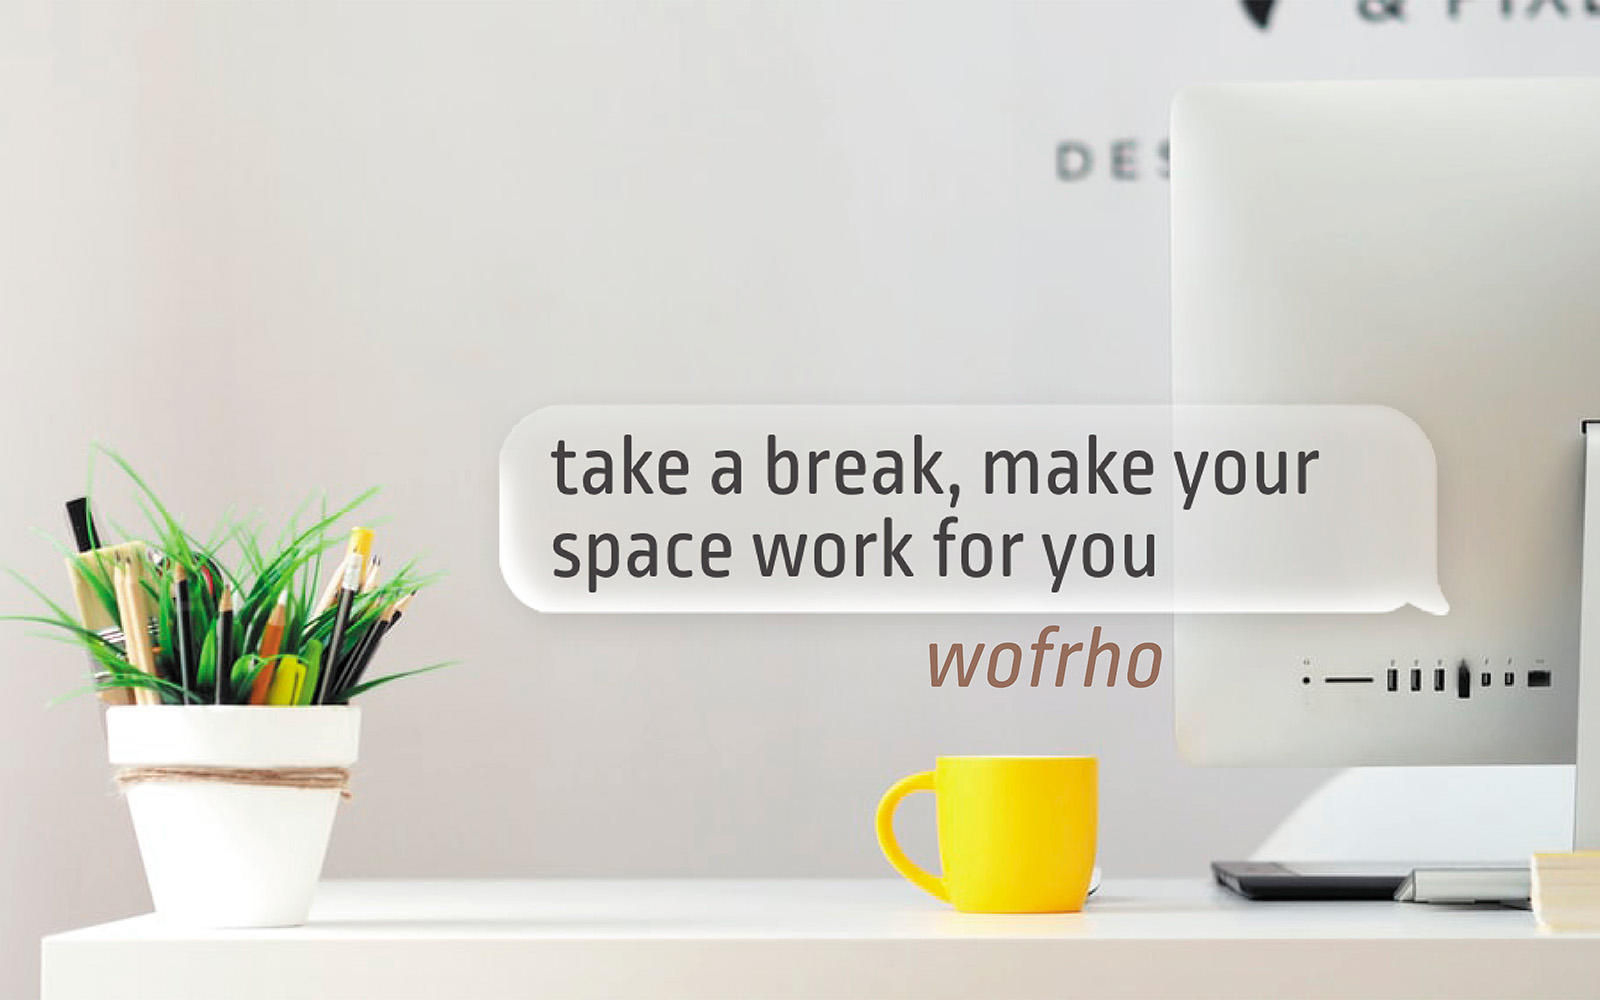 wofrho ad with a speech bubble that reads: take a break, make your space work for you